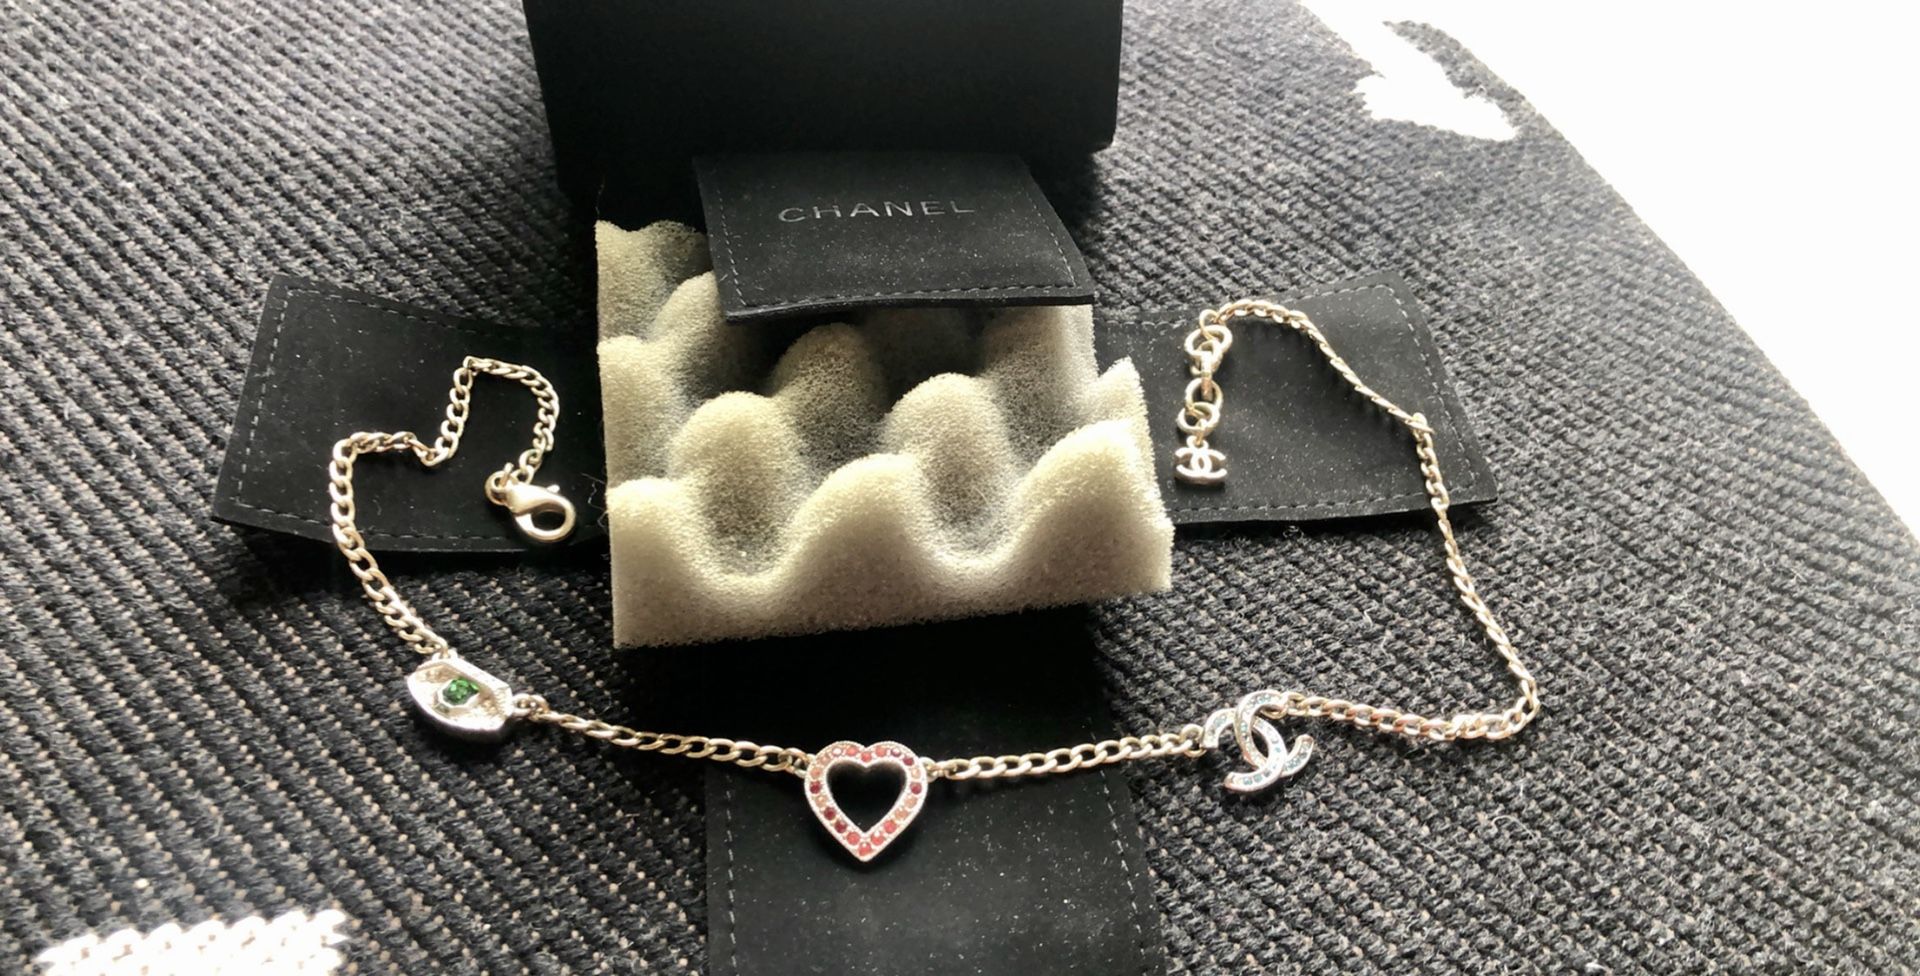 Chanel Evil eye and heart necklace